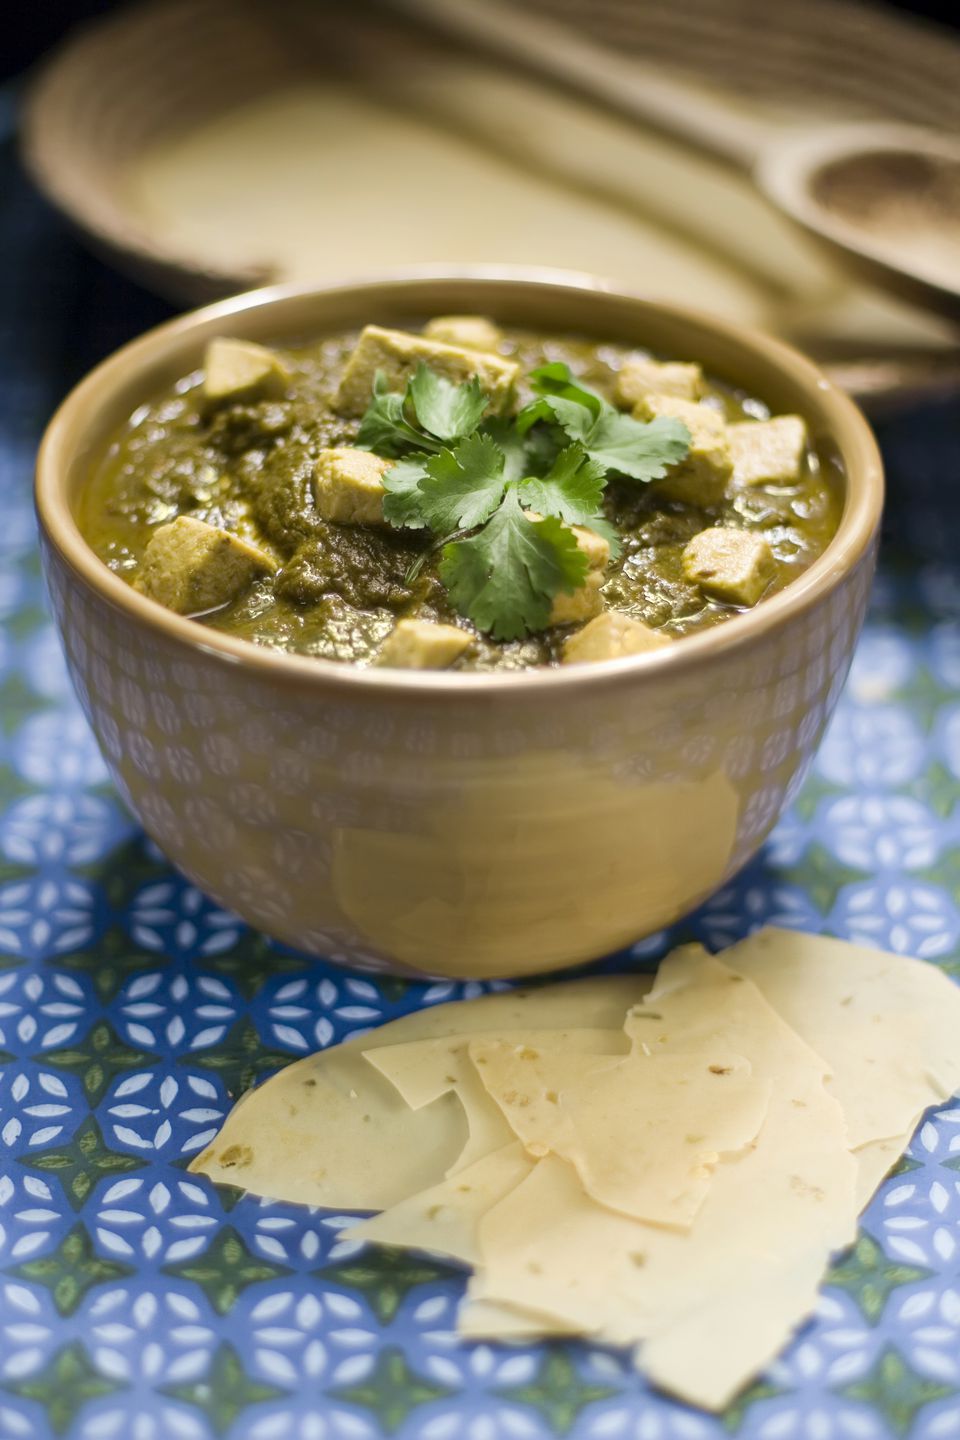 Most Popular Indian Vegetarian Dishes